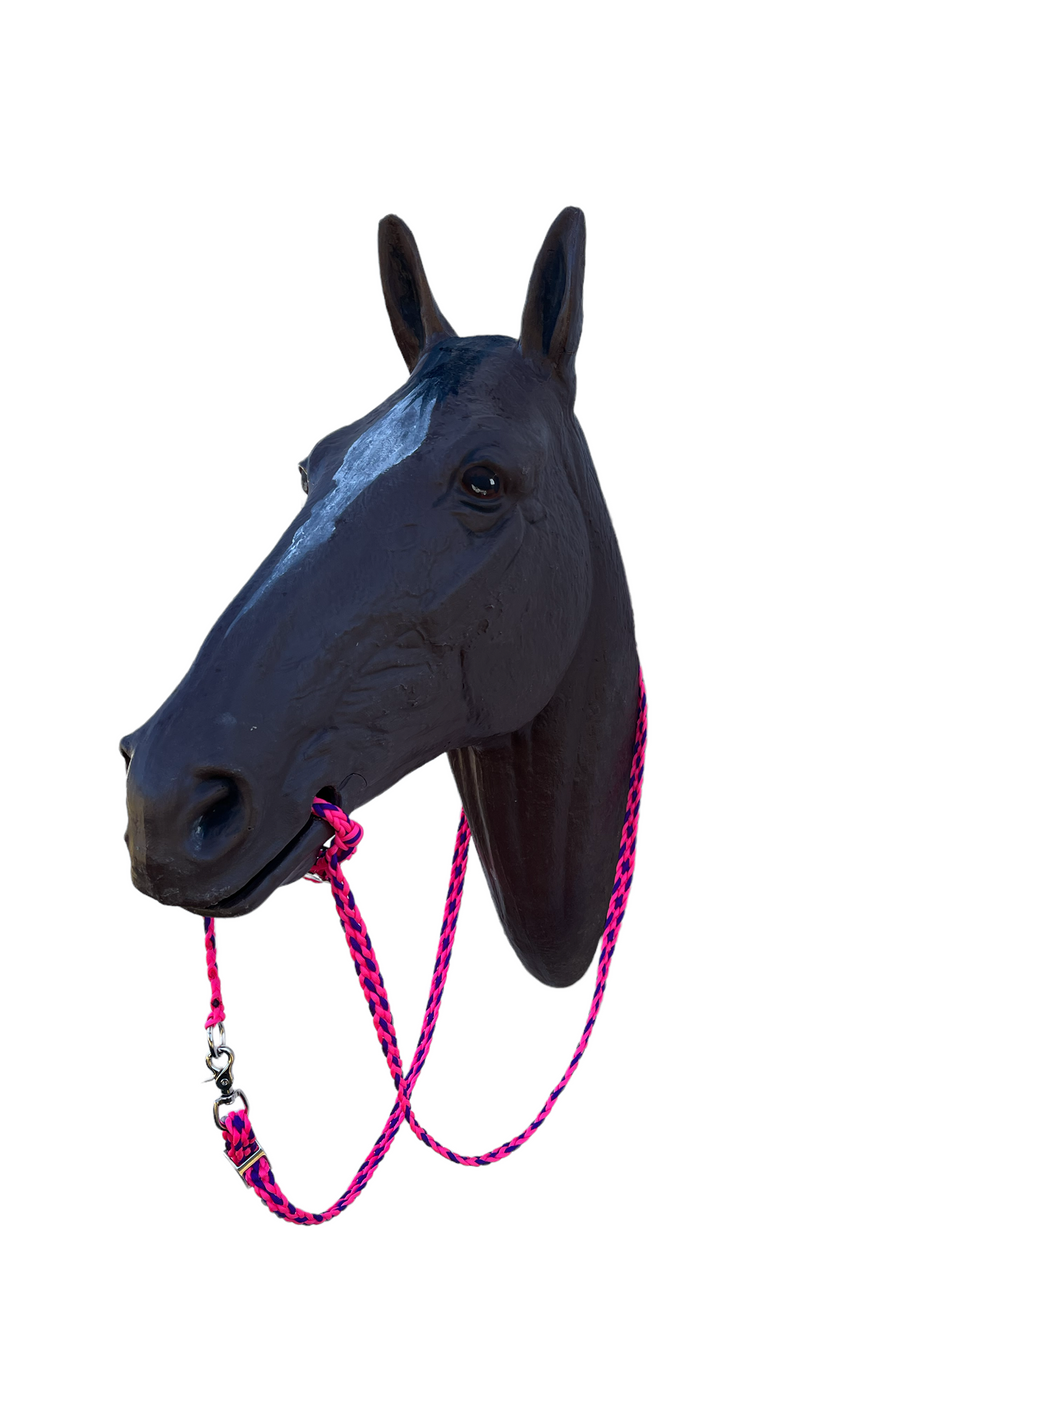 War bridle with buckle chinstrap and reins